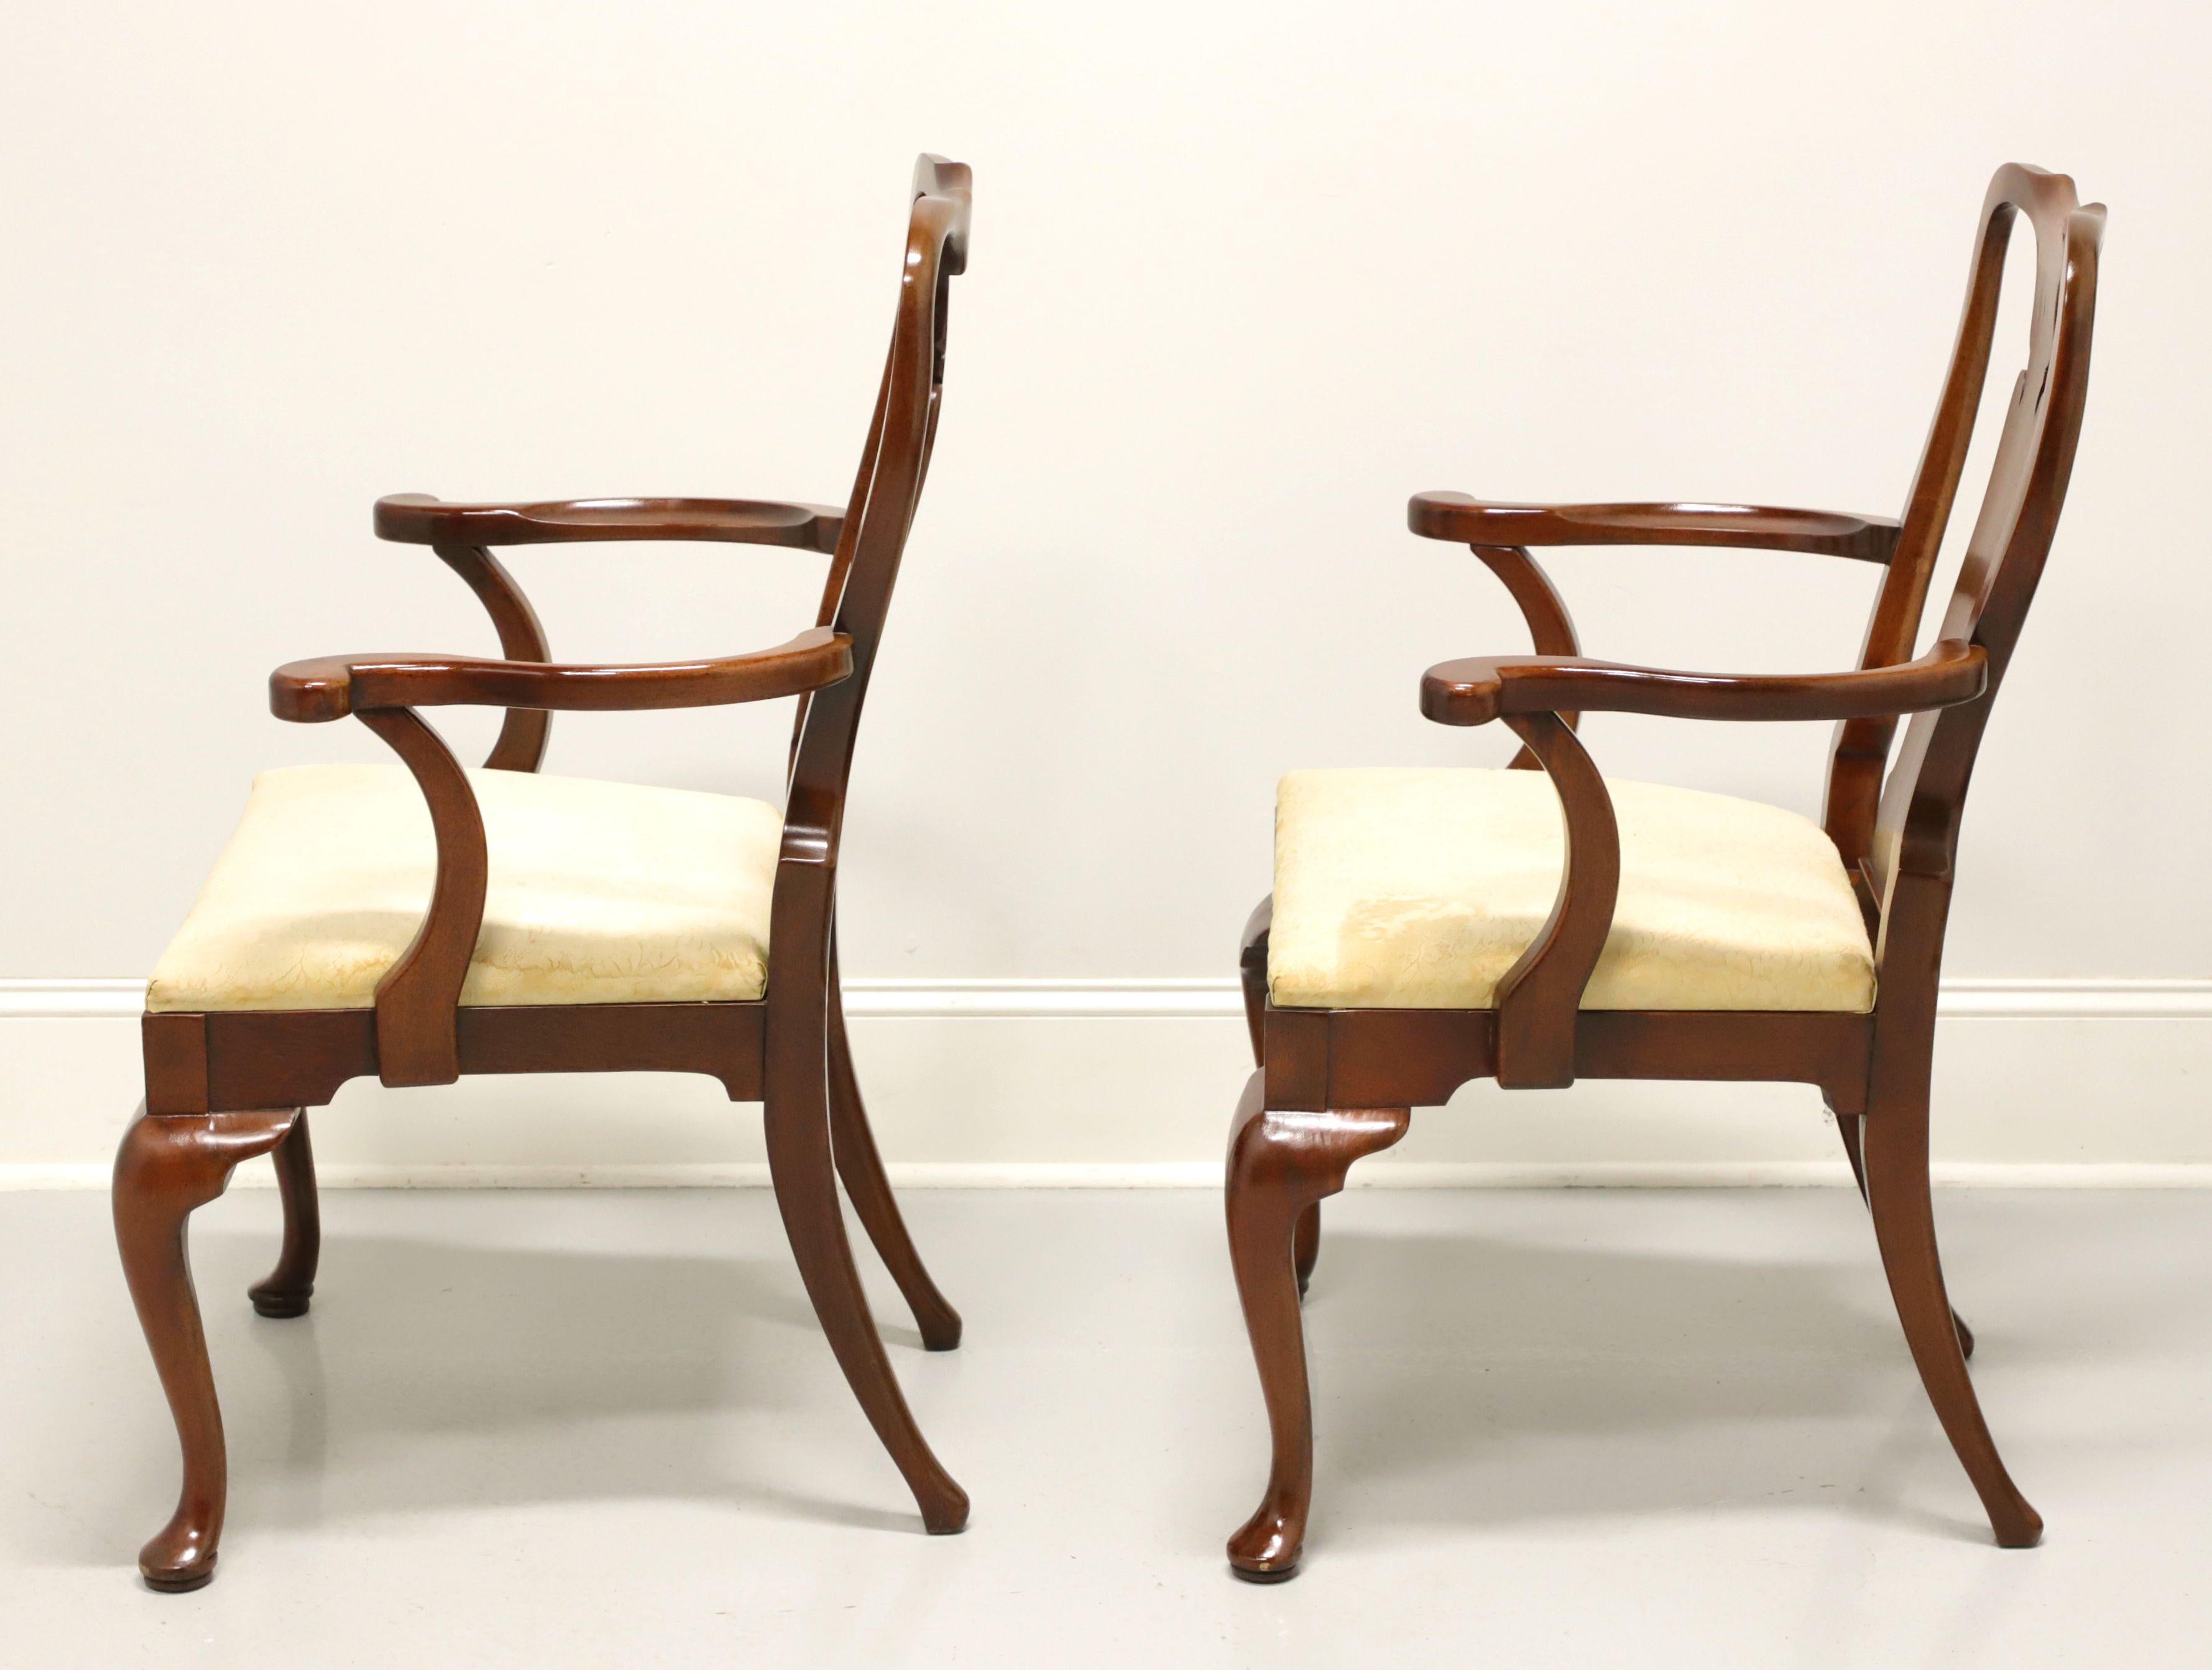 Fabric HICKORY CHAIR Amber Mahogany Queen Anne Dining Armchairs - Pair